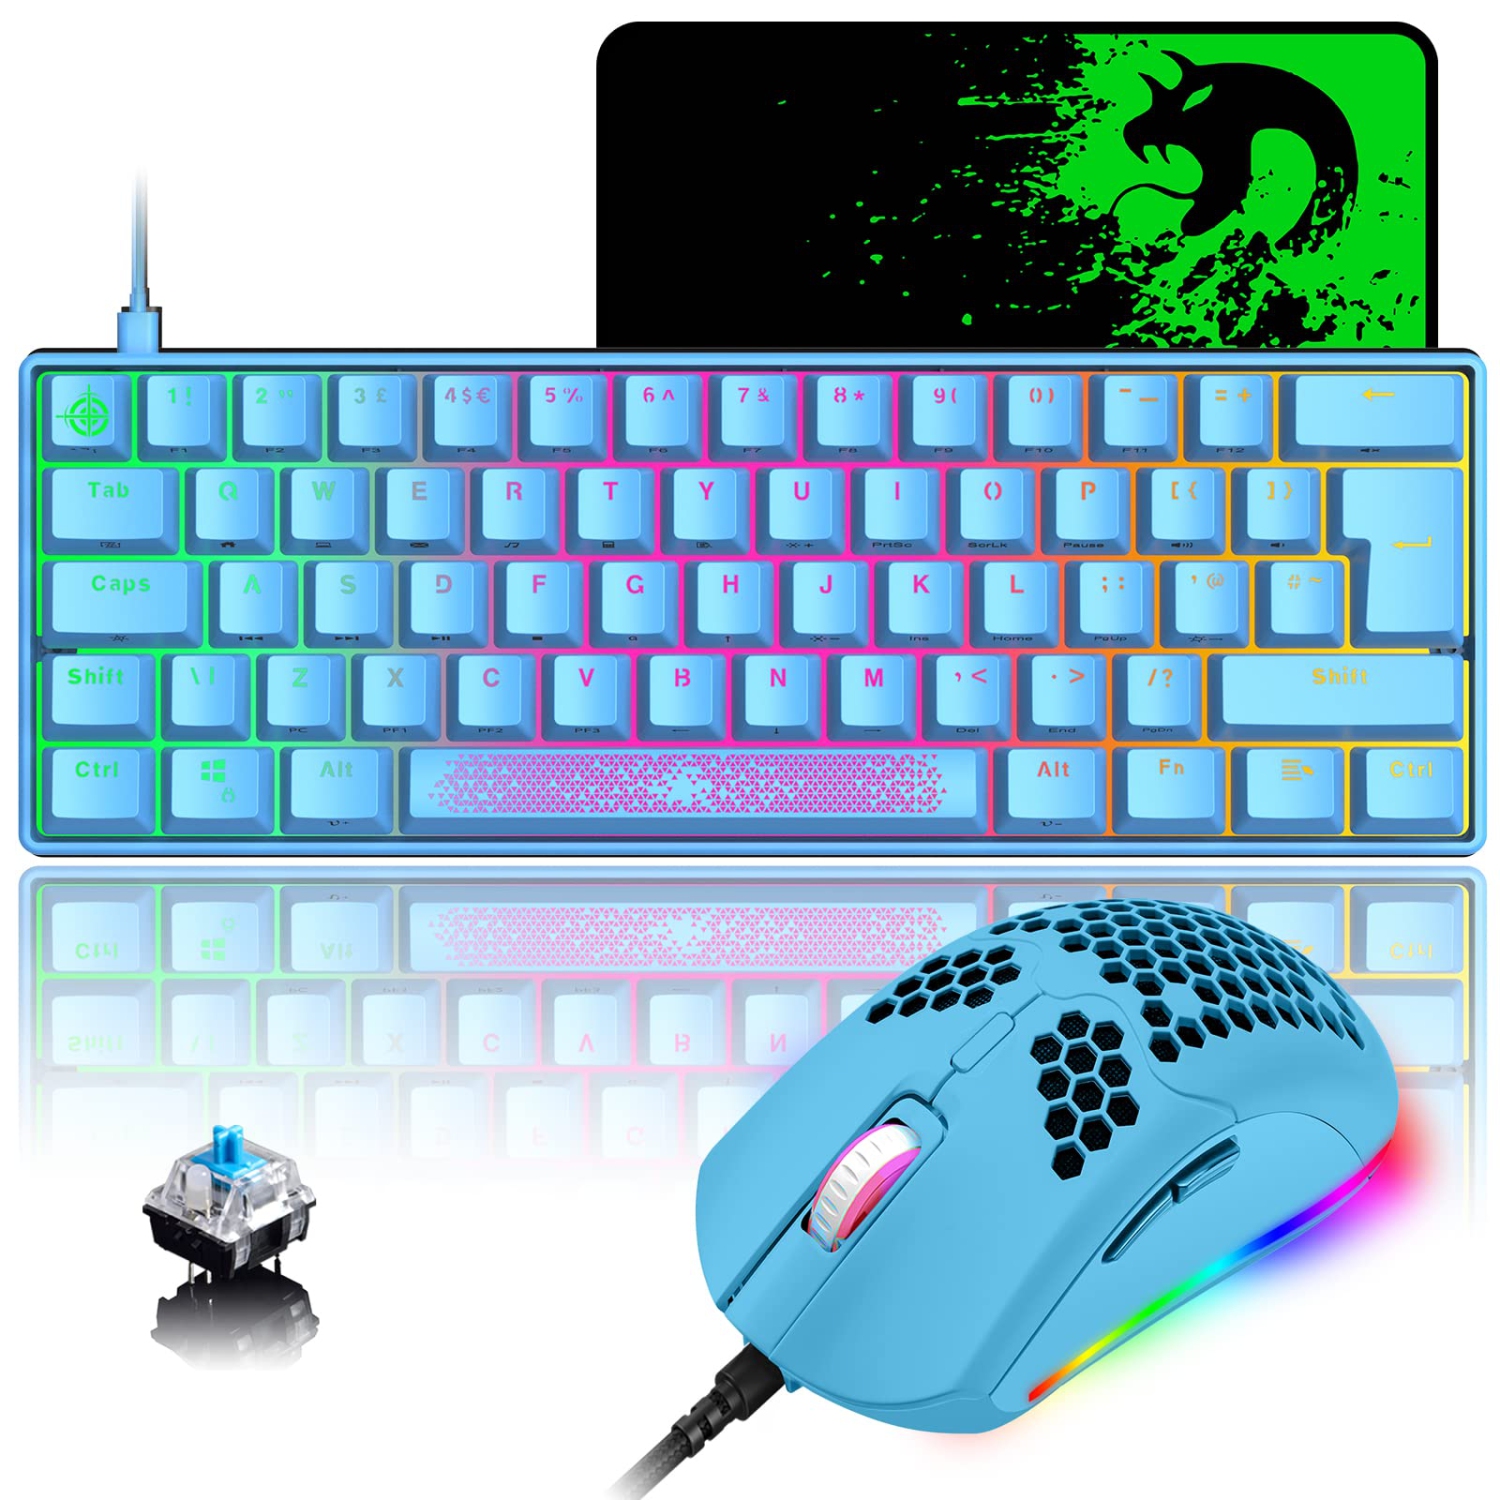 Mechanical Mini RGB Gaming Keyboard and Mouse with Compact 62Key Layout Rainbow Backlight Anti-ghosting 6400DPI Honeycomb Mice Type-C Wired for PC Mac Gamer Laptop( Blue Switch)